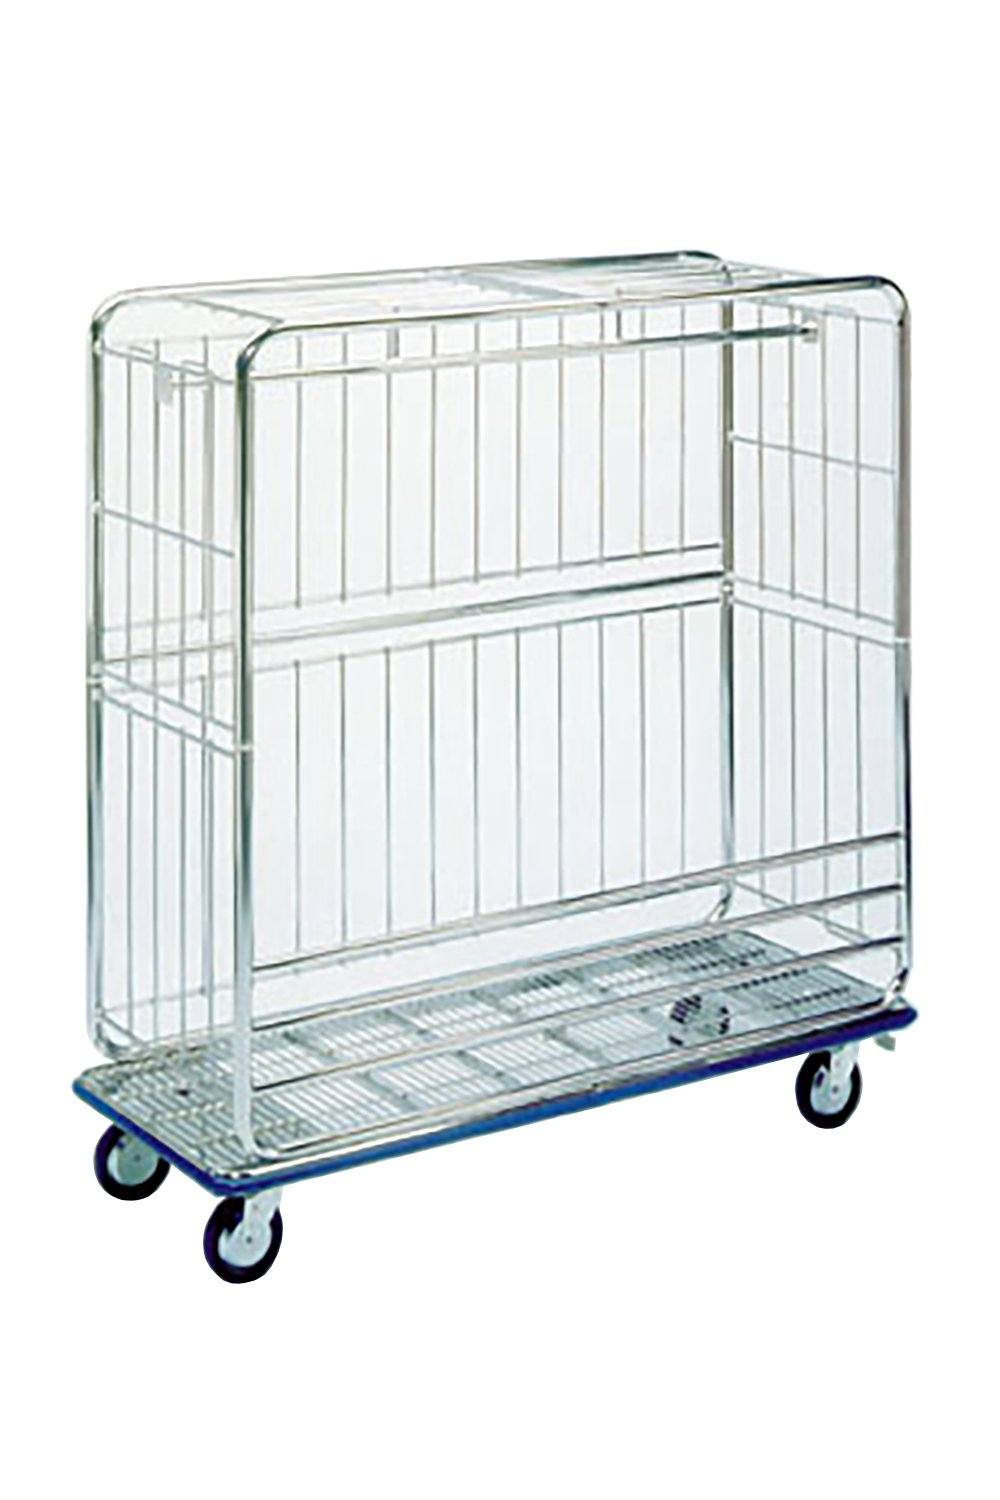 Over The Road Cart Transport & Utility Carts Acart 